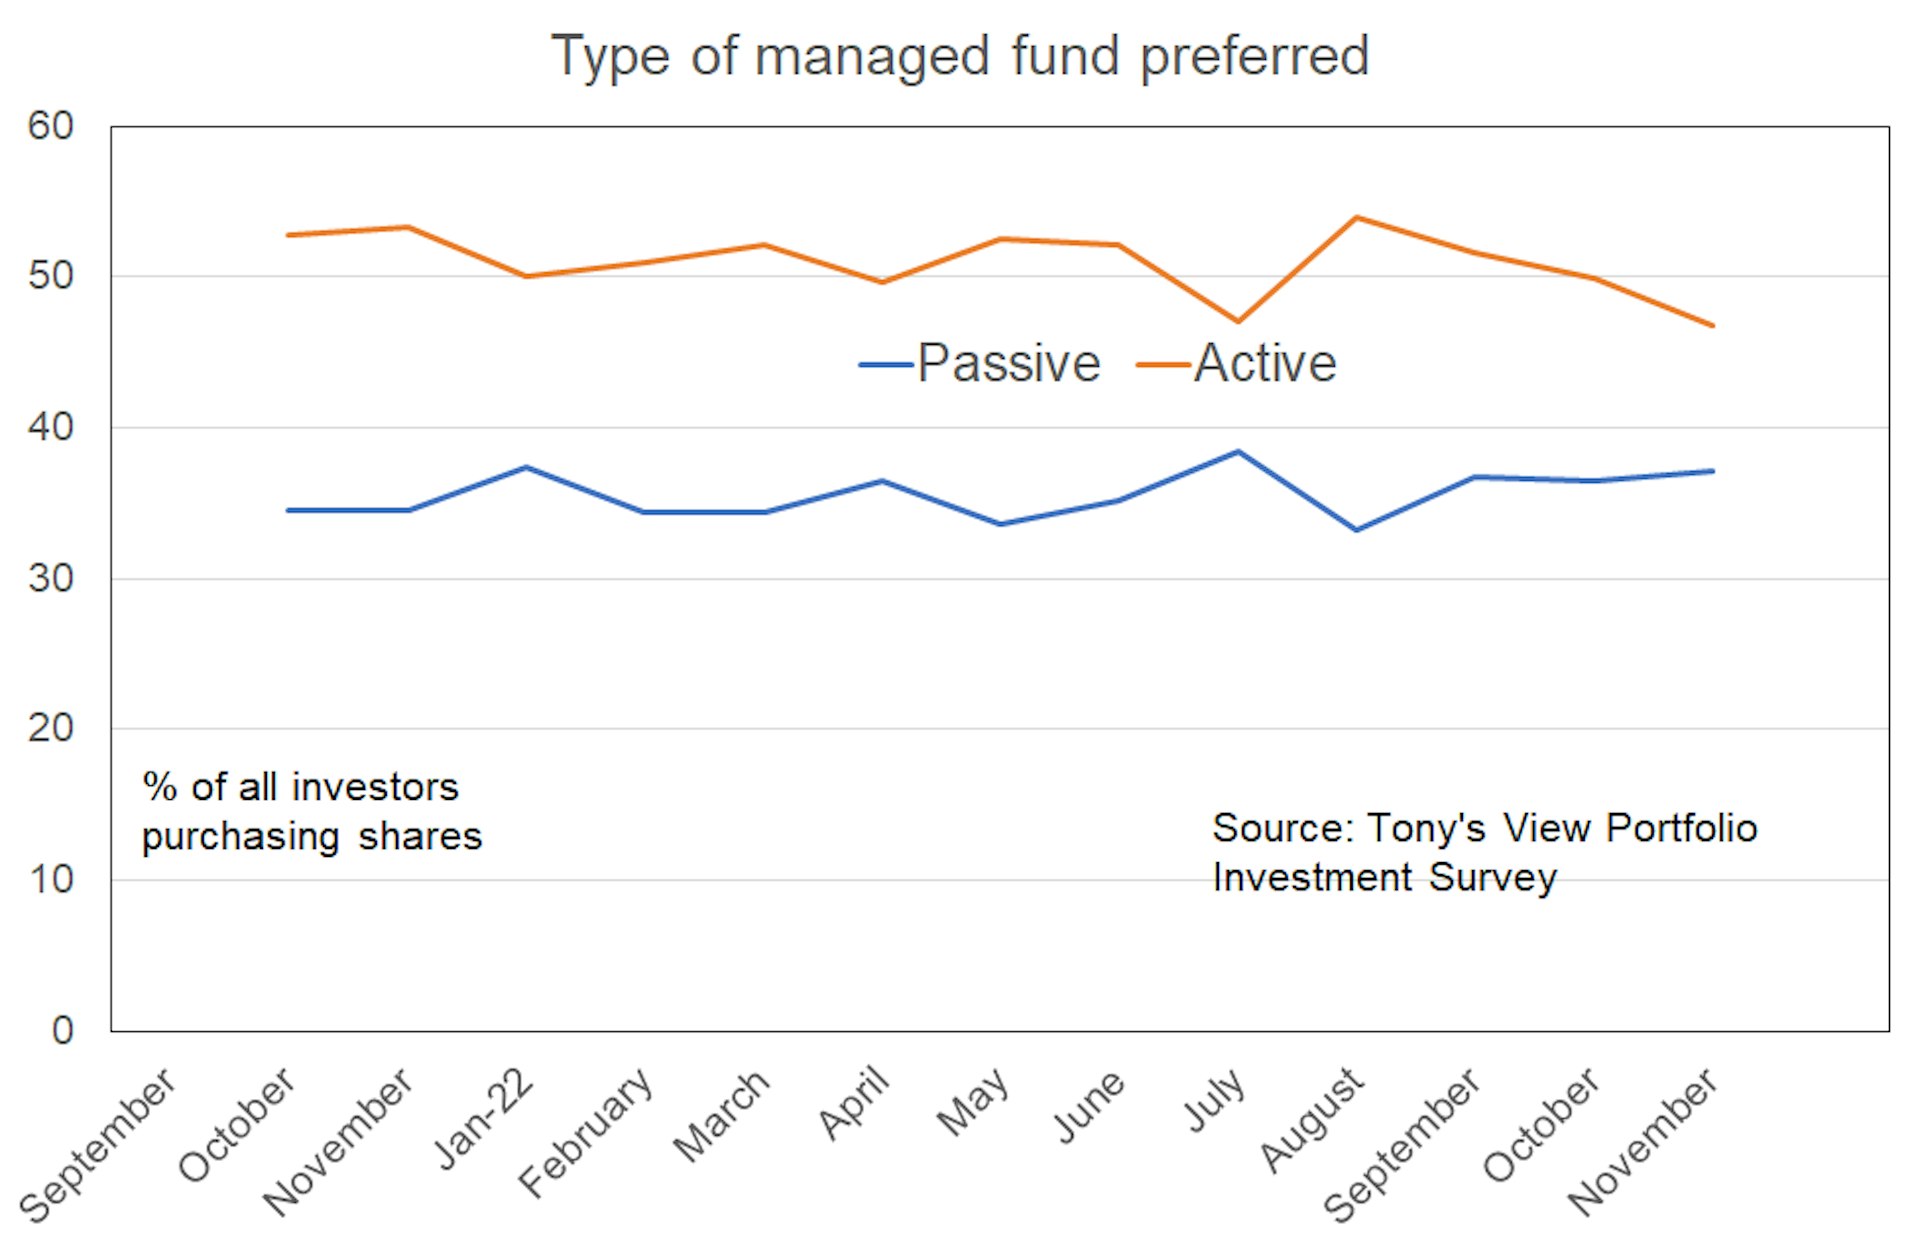 Chart showing that investors still prefer actively managed funds over passive funds, but the gap between the two is shrinking over recent months. 